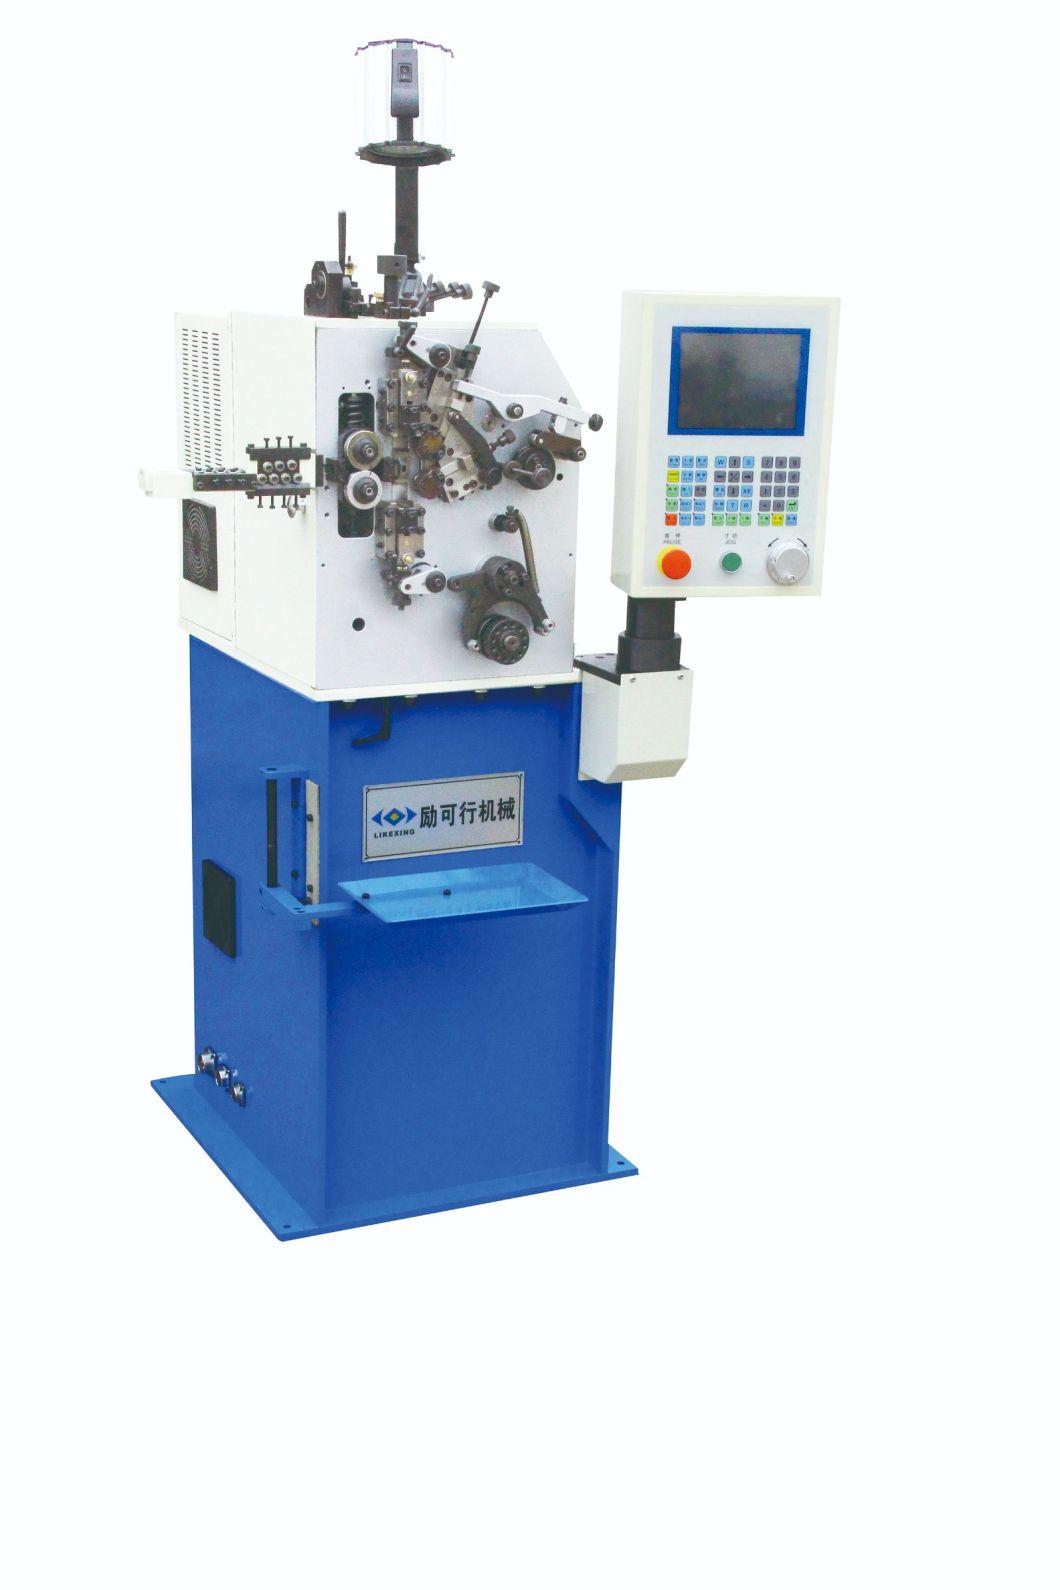 Likexing 208 Hot Sale Compression CNC Spring Machine 0.1-0.8mm Wire Diameter